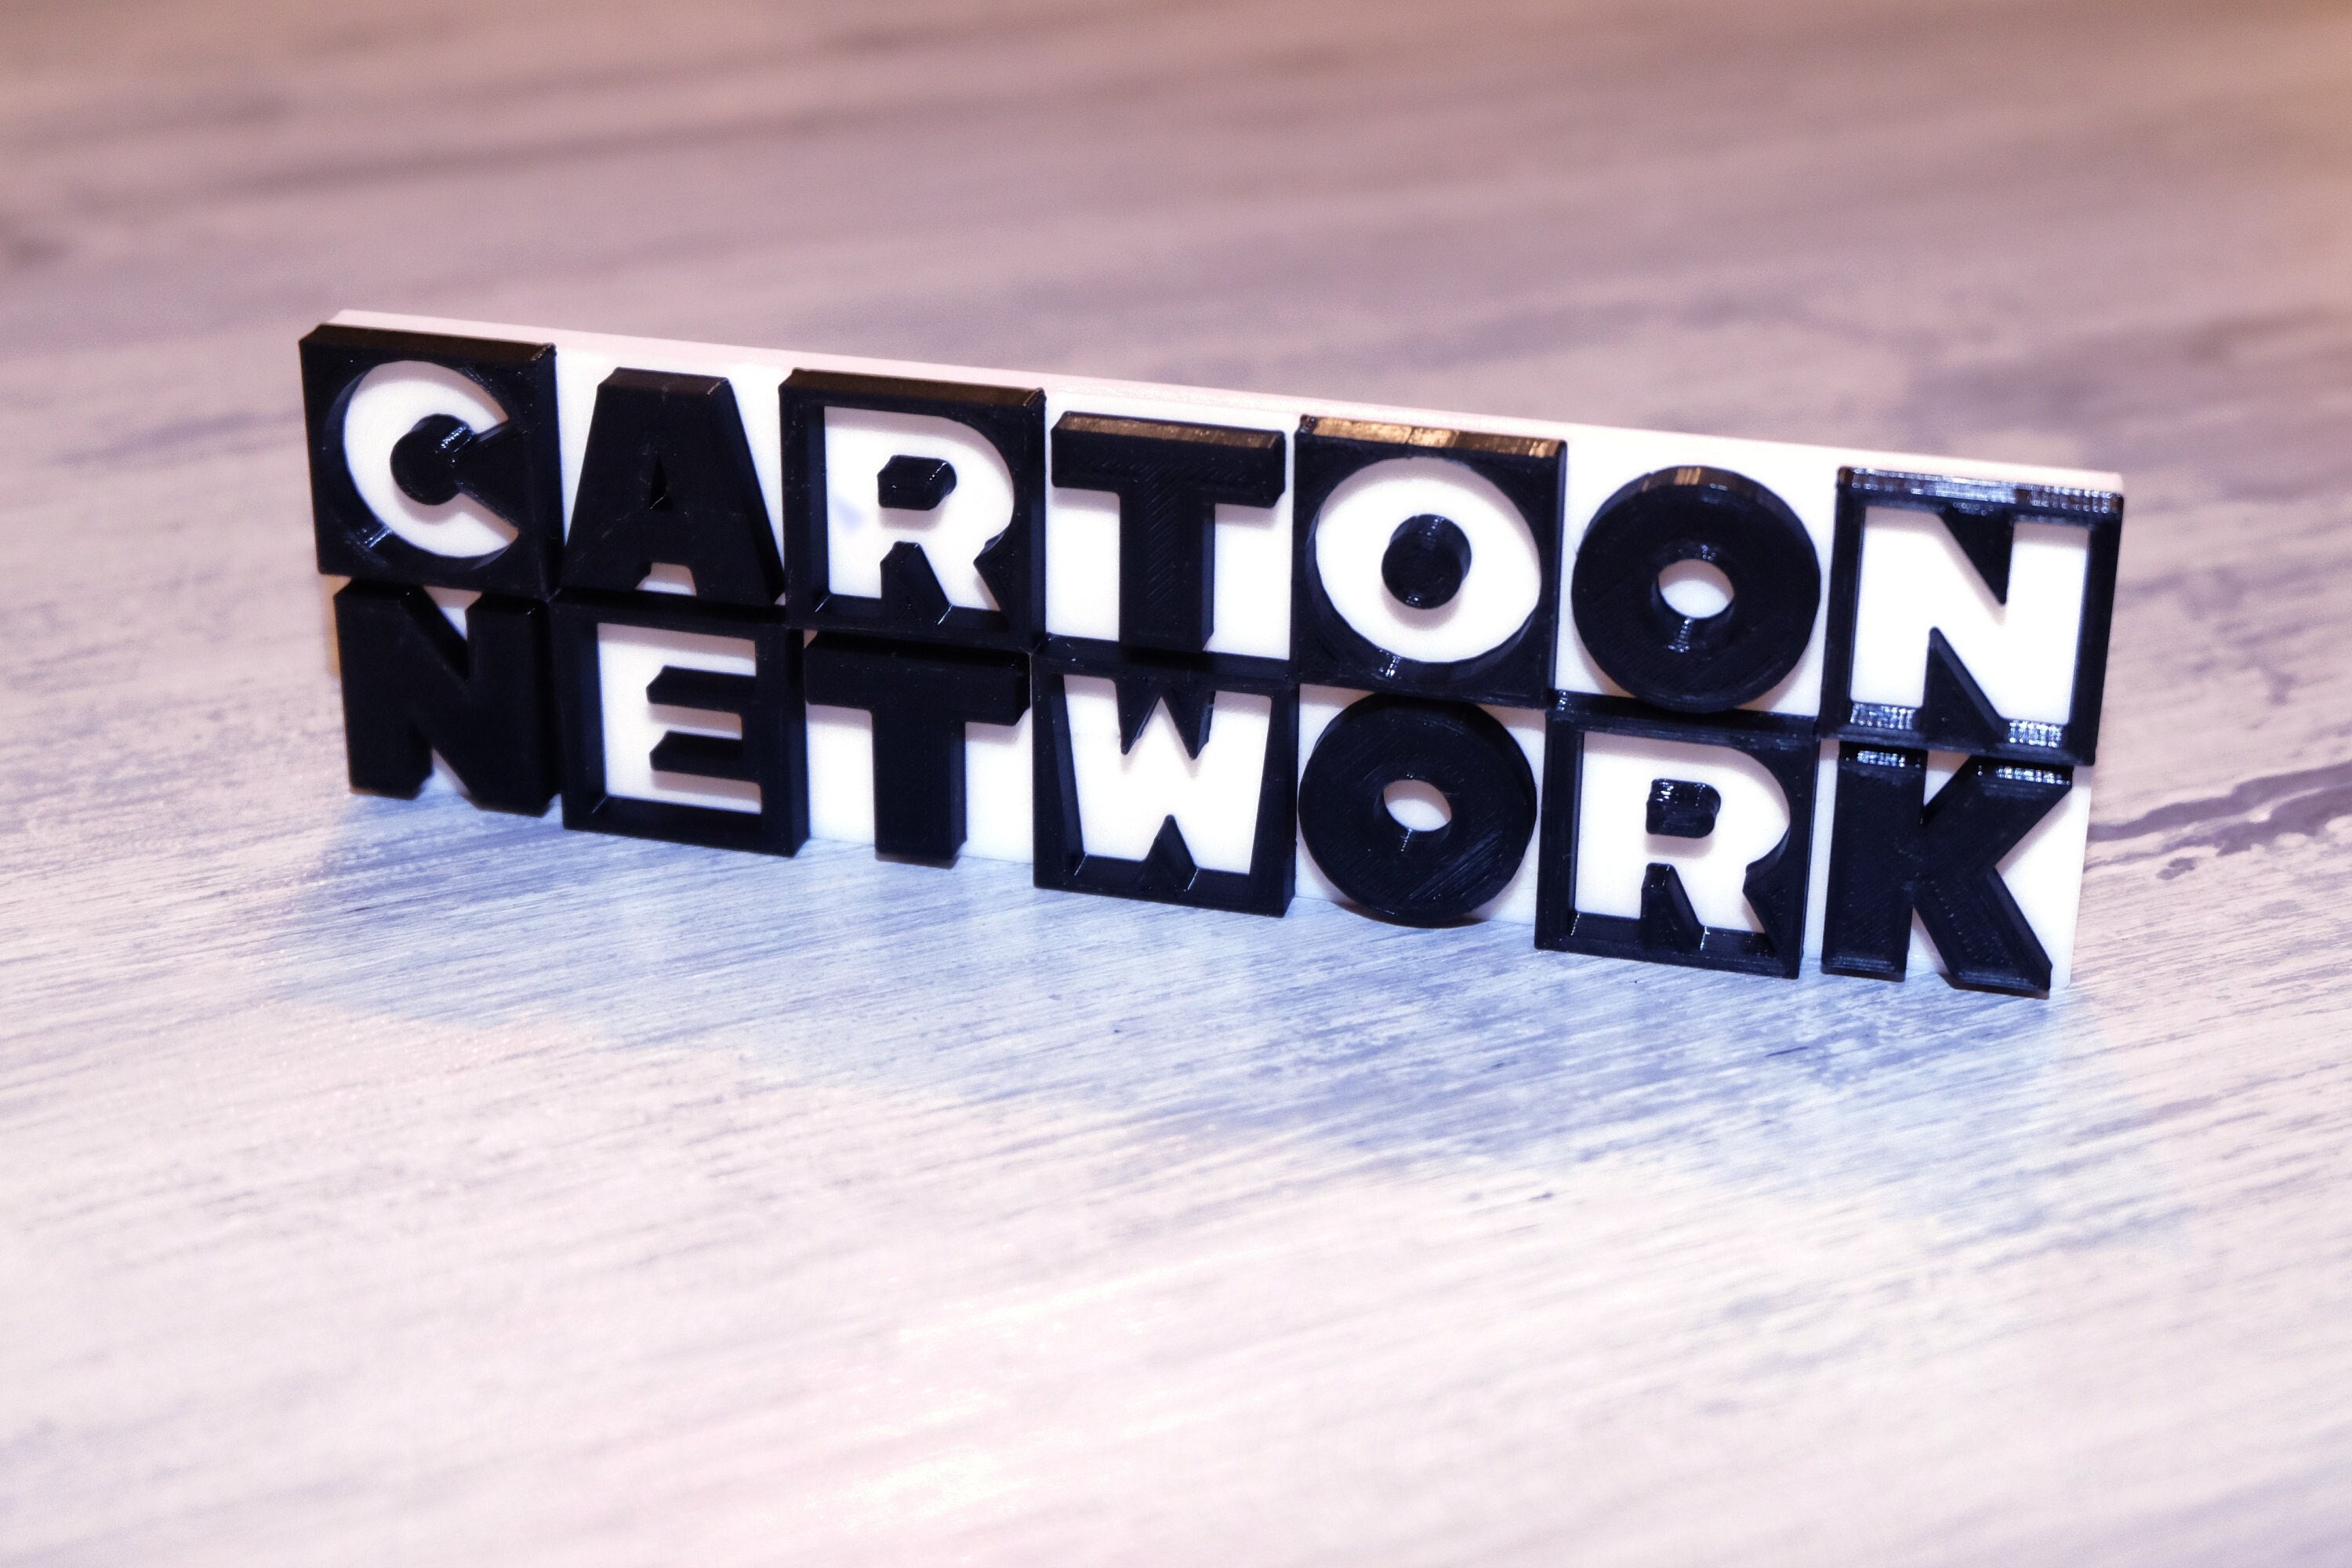 CN Cartoon Network Logo 3D Printed Pretend Play Kids Toy Learning 20th  Century